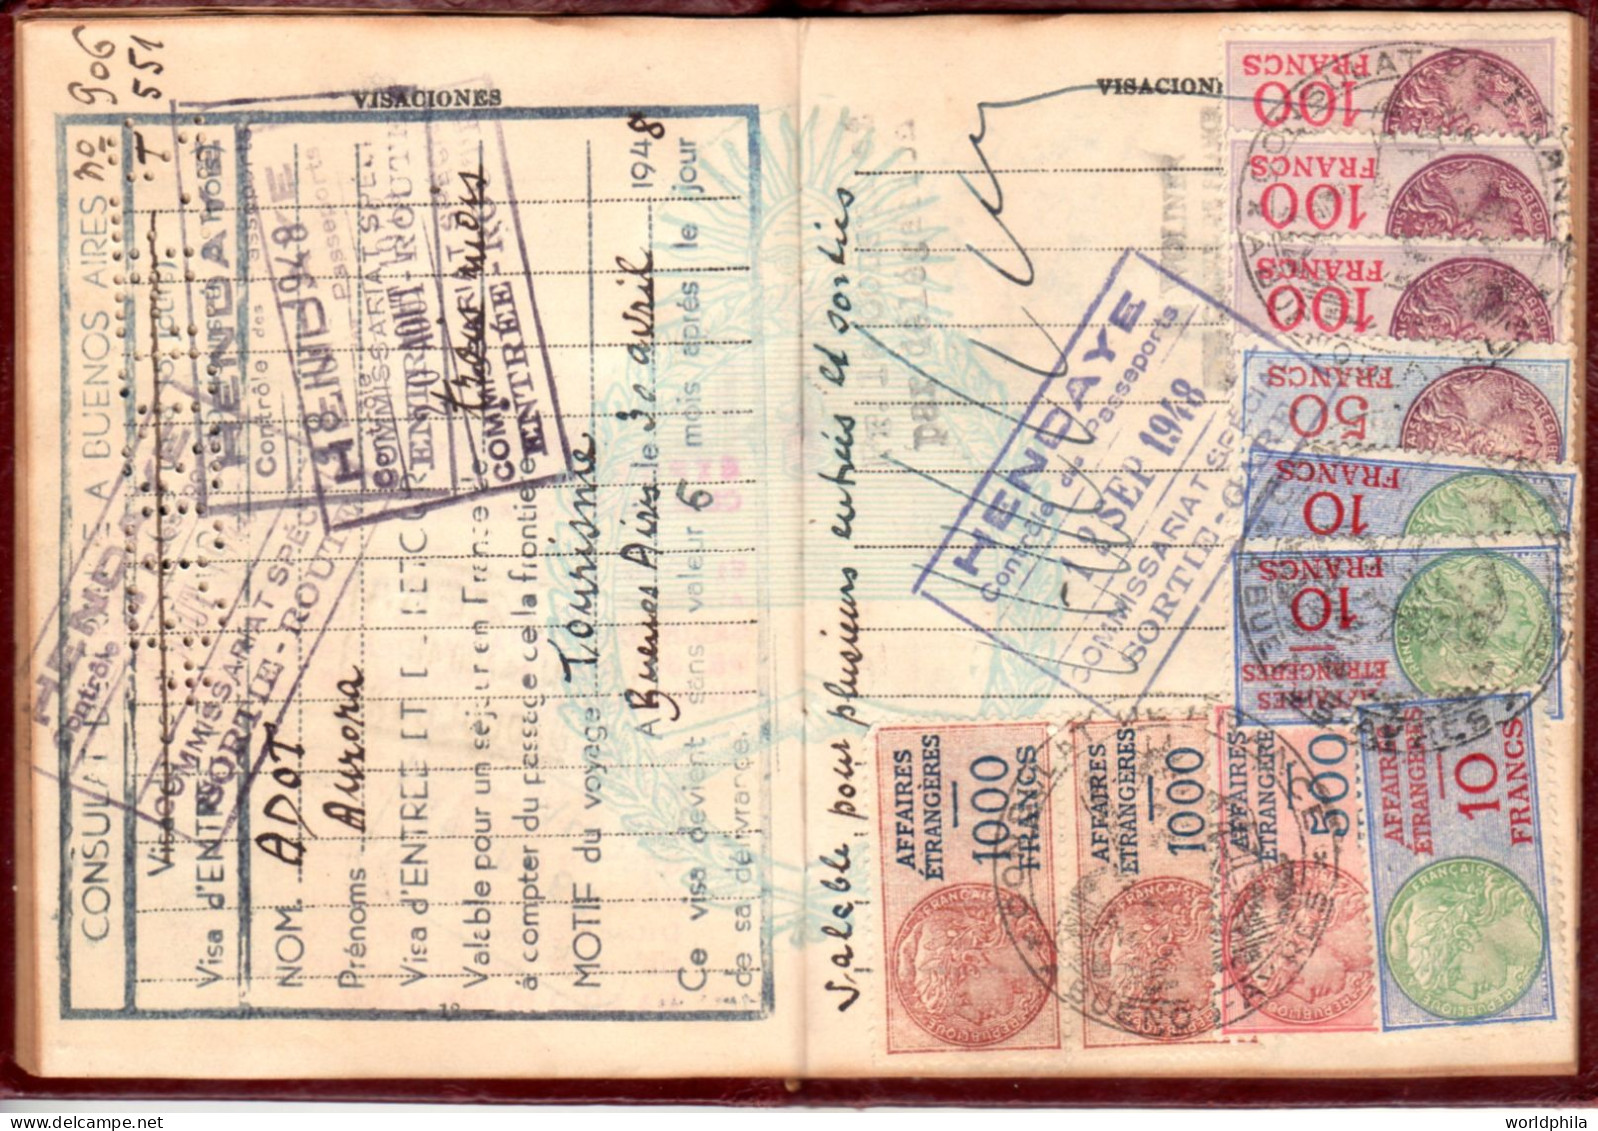 Argentina 1948 Much Travelled Document, Europe, Many Revenue Stamps. Signed Passport History Document - Documenti Storici